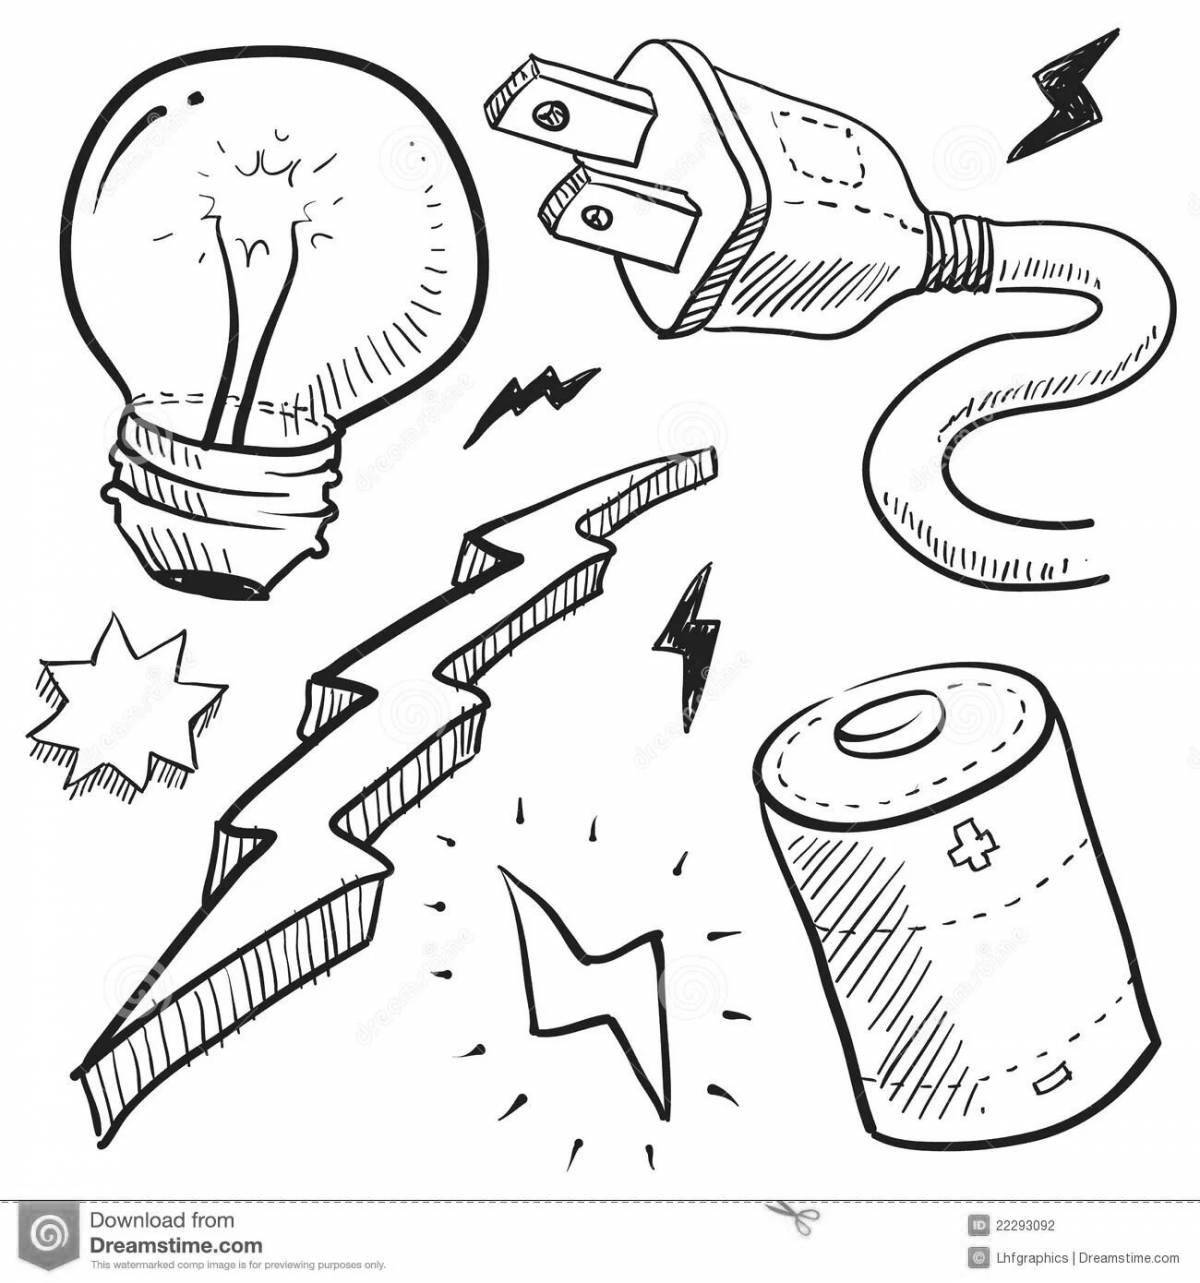 Creative electrical safety coloring book